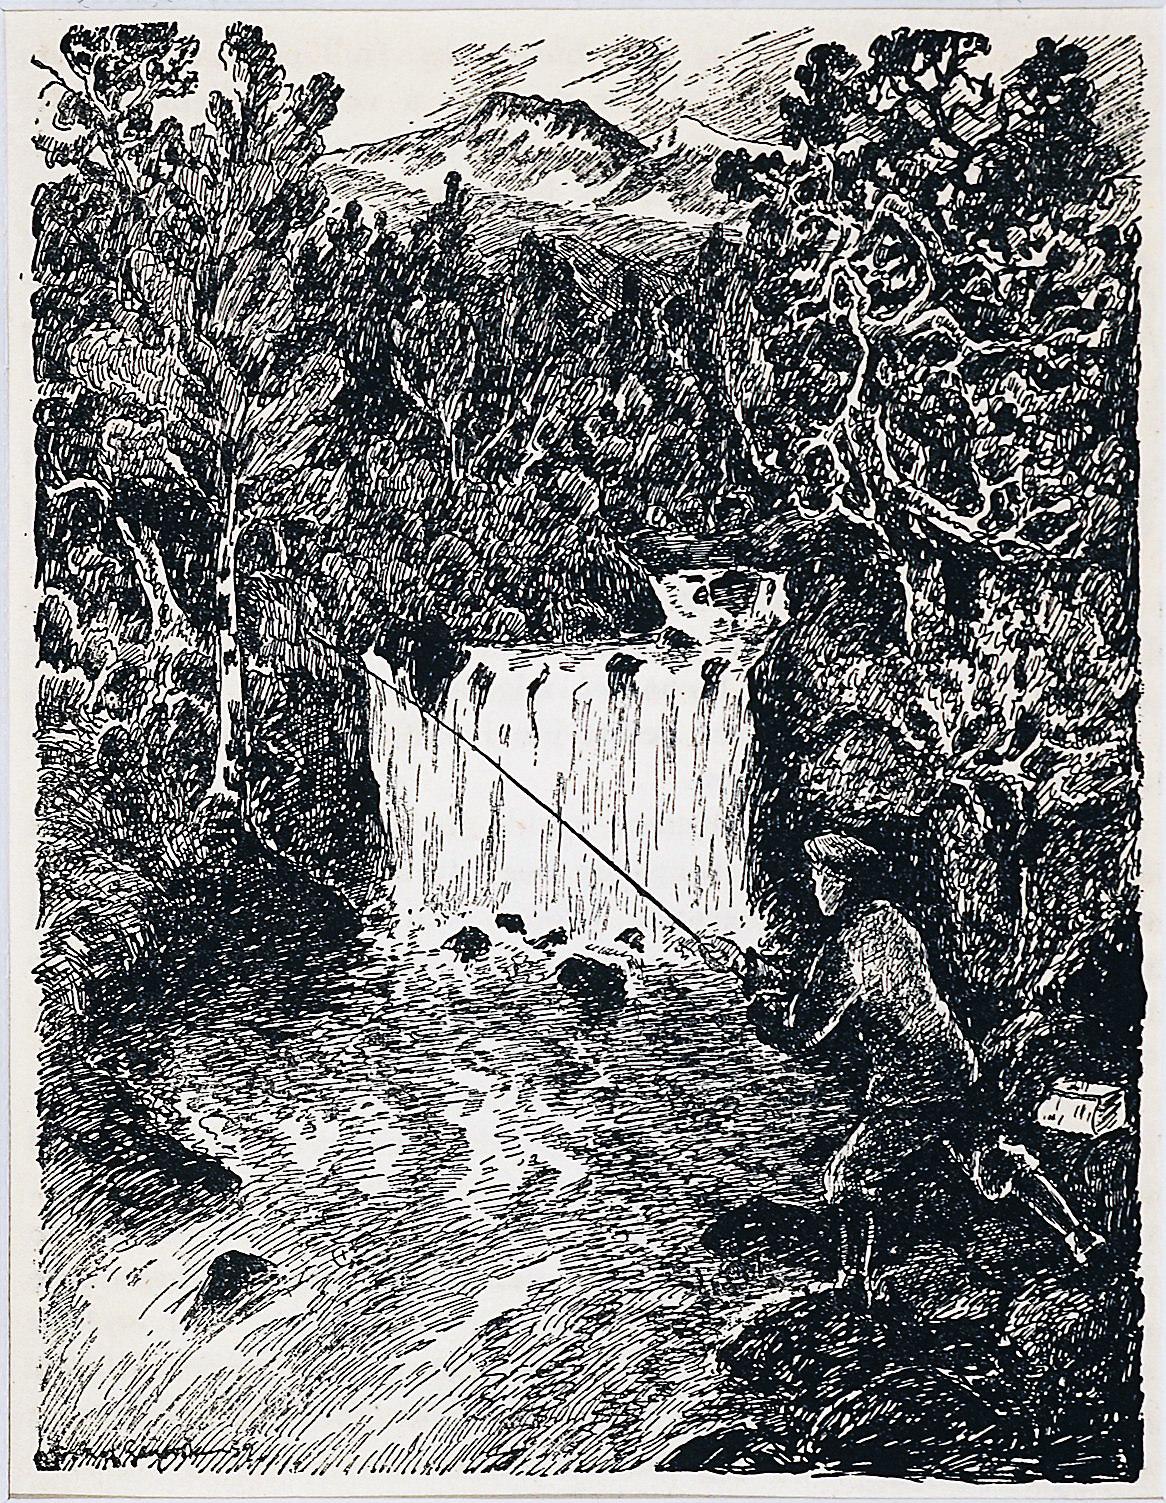 The Perfect Fishing Spot and Wild Turkey on a Branch - Print by Unknown